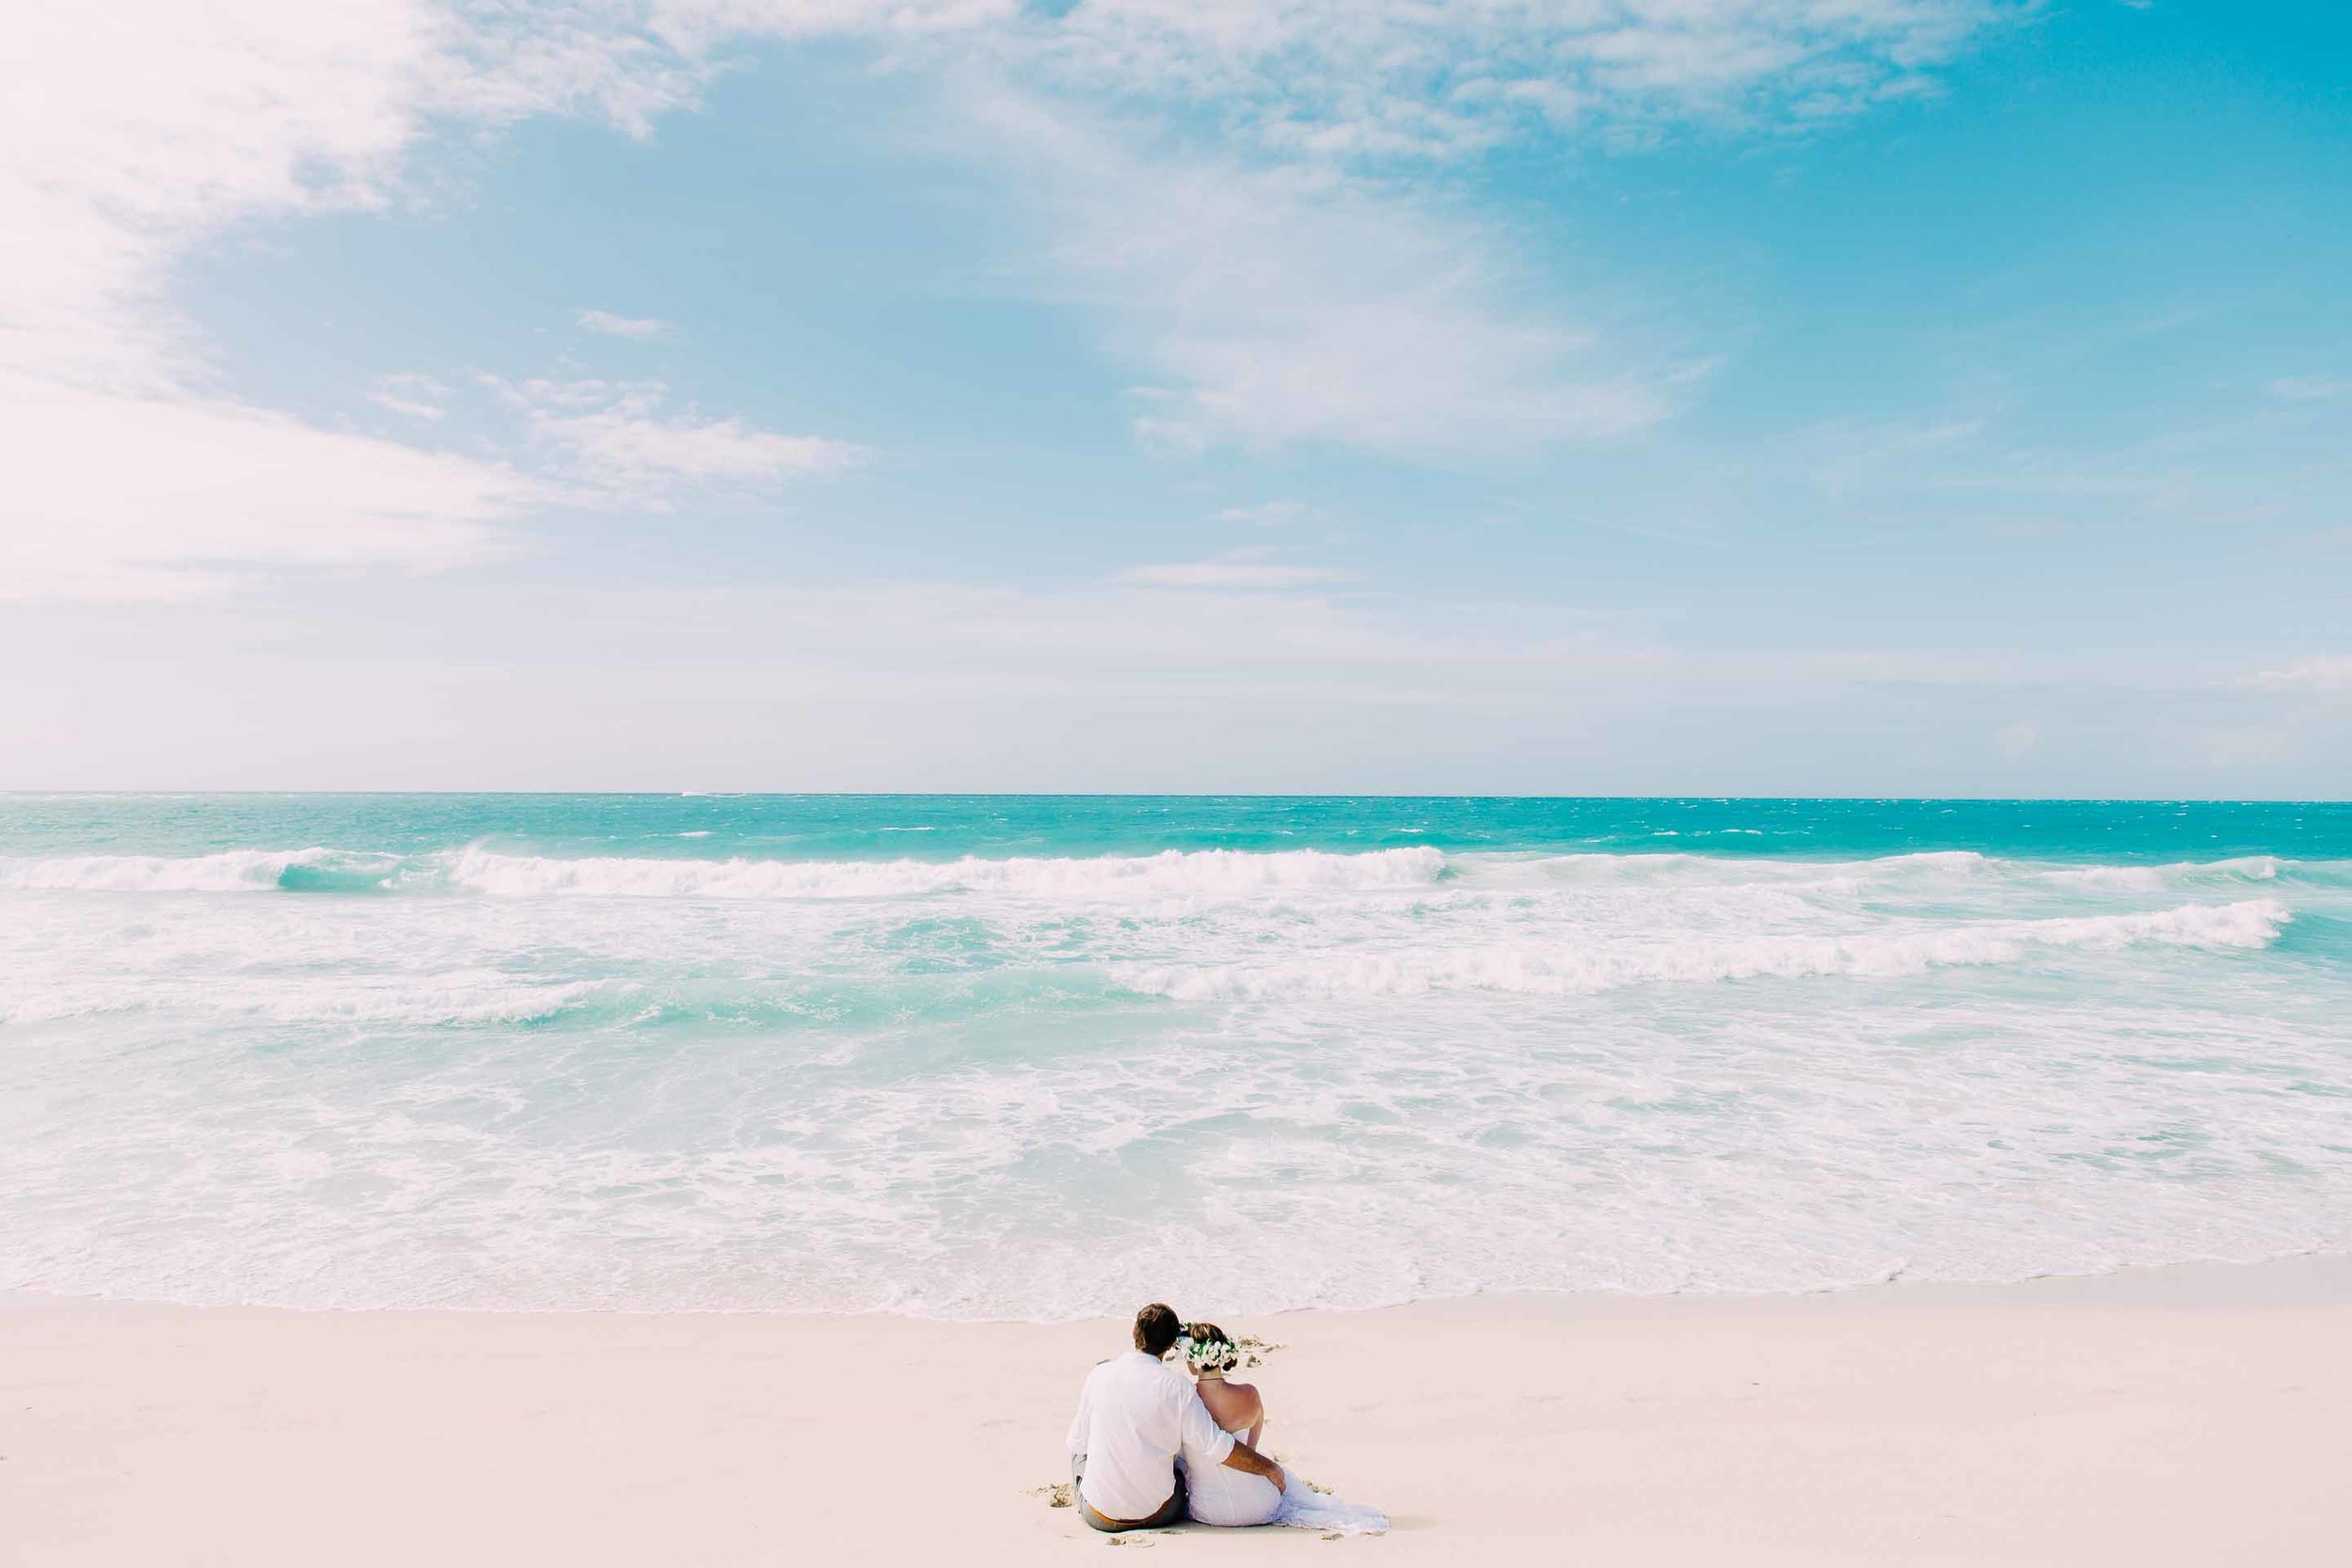 the couple sitting alone on the deserted beach